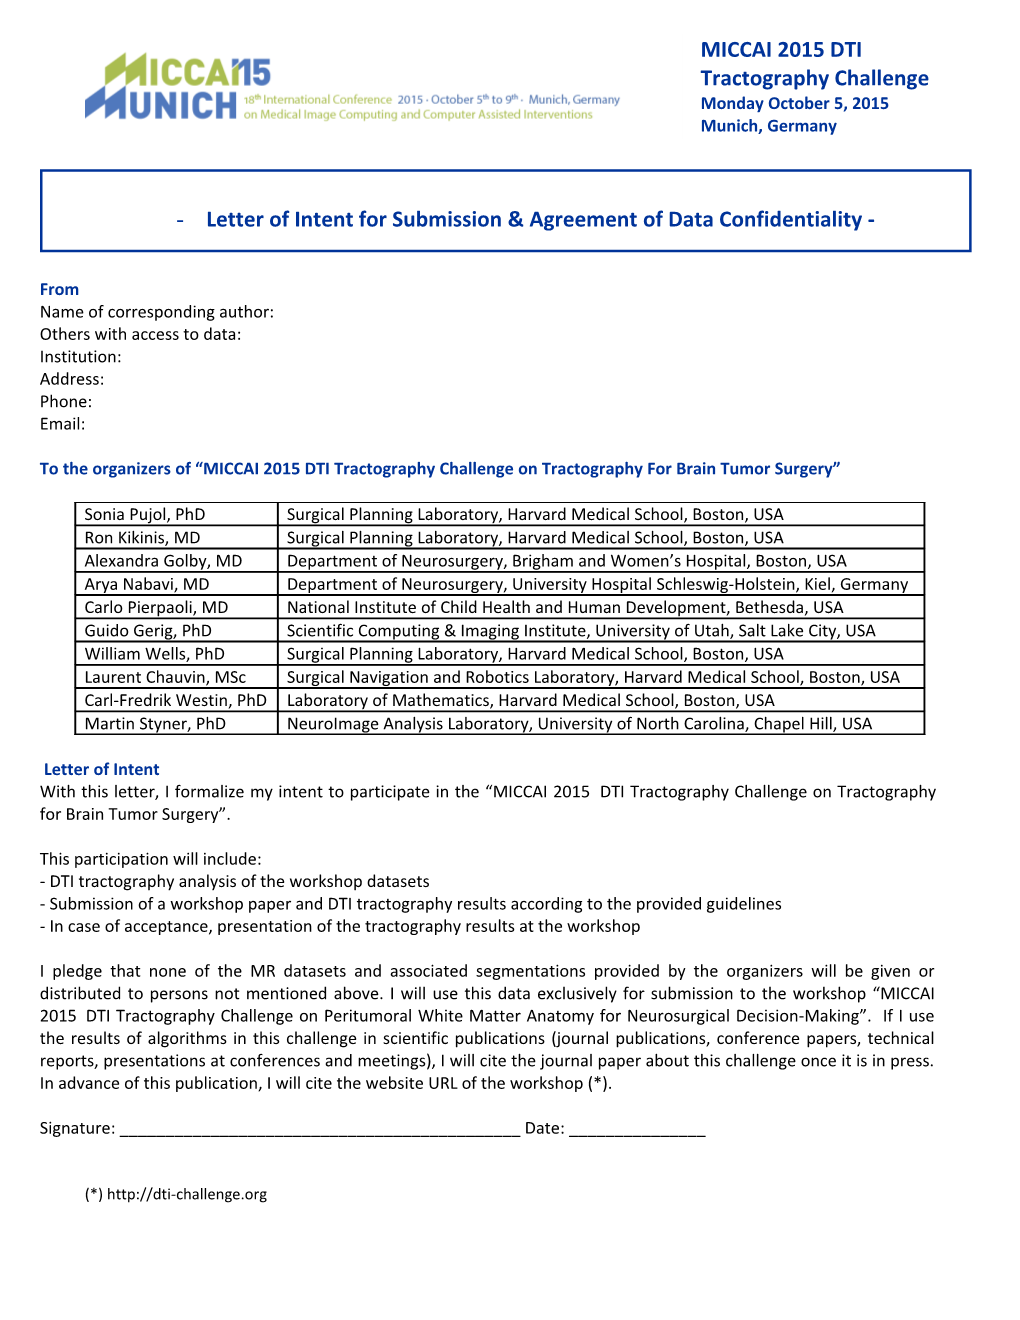 Letter of Intent for Submission & Agreement of Data Confidentiality